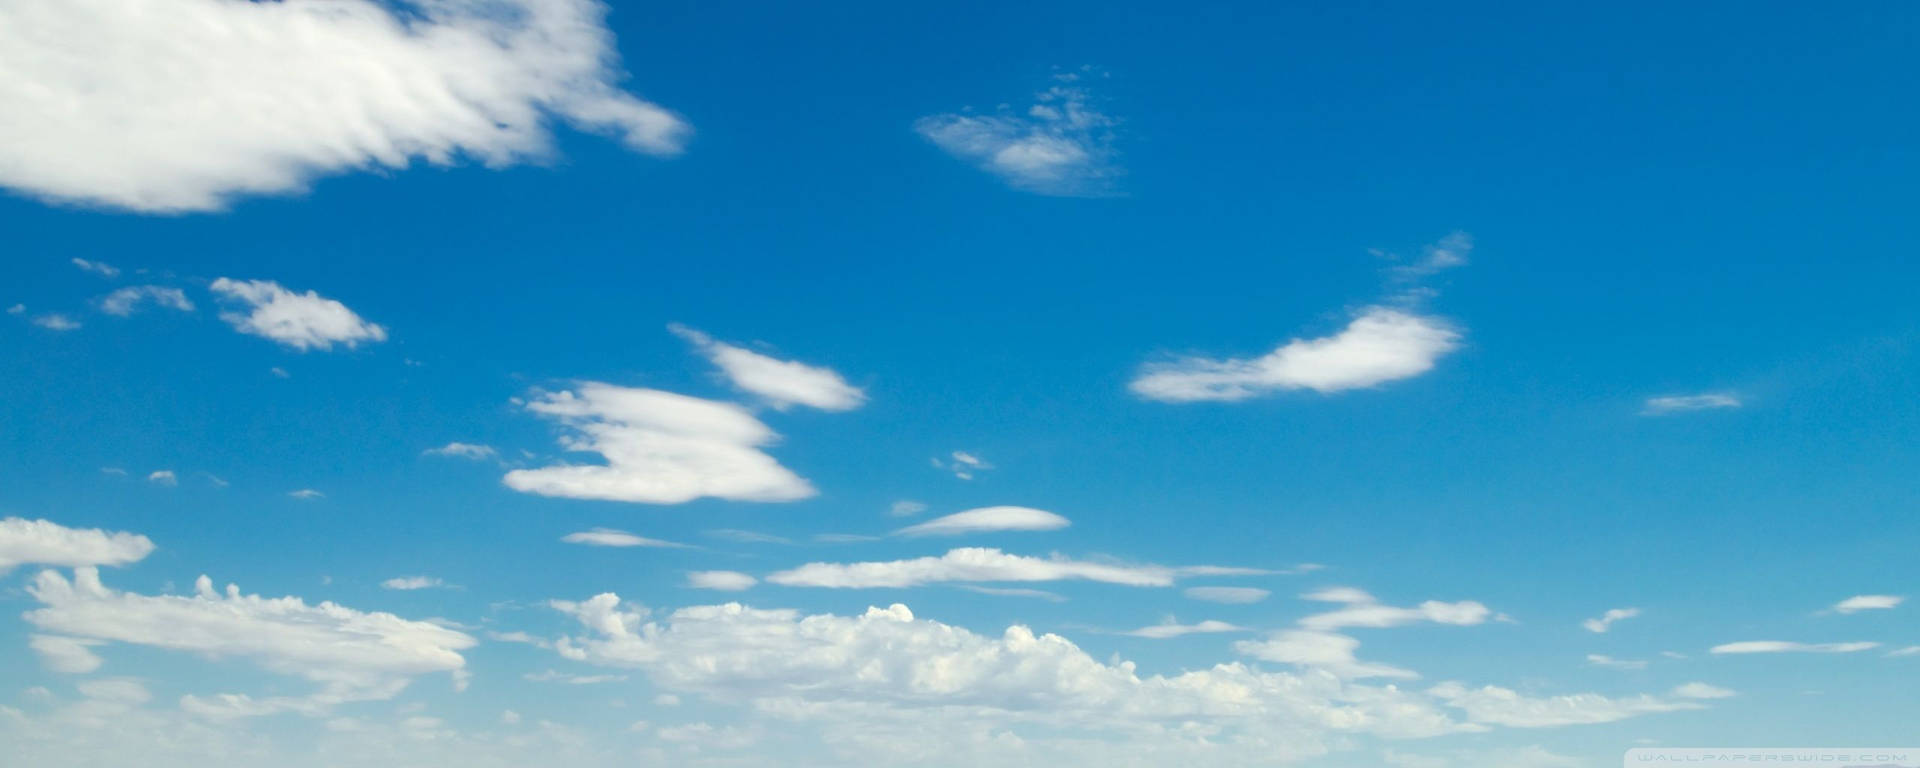 A Blue Sky With White Clouds And A Plane Flying Over It Background